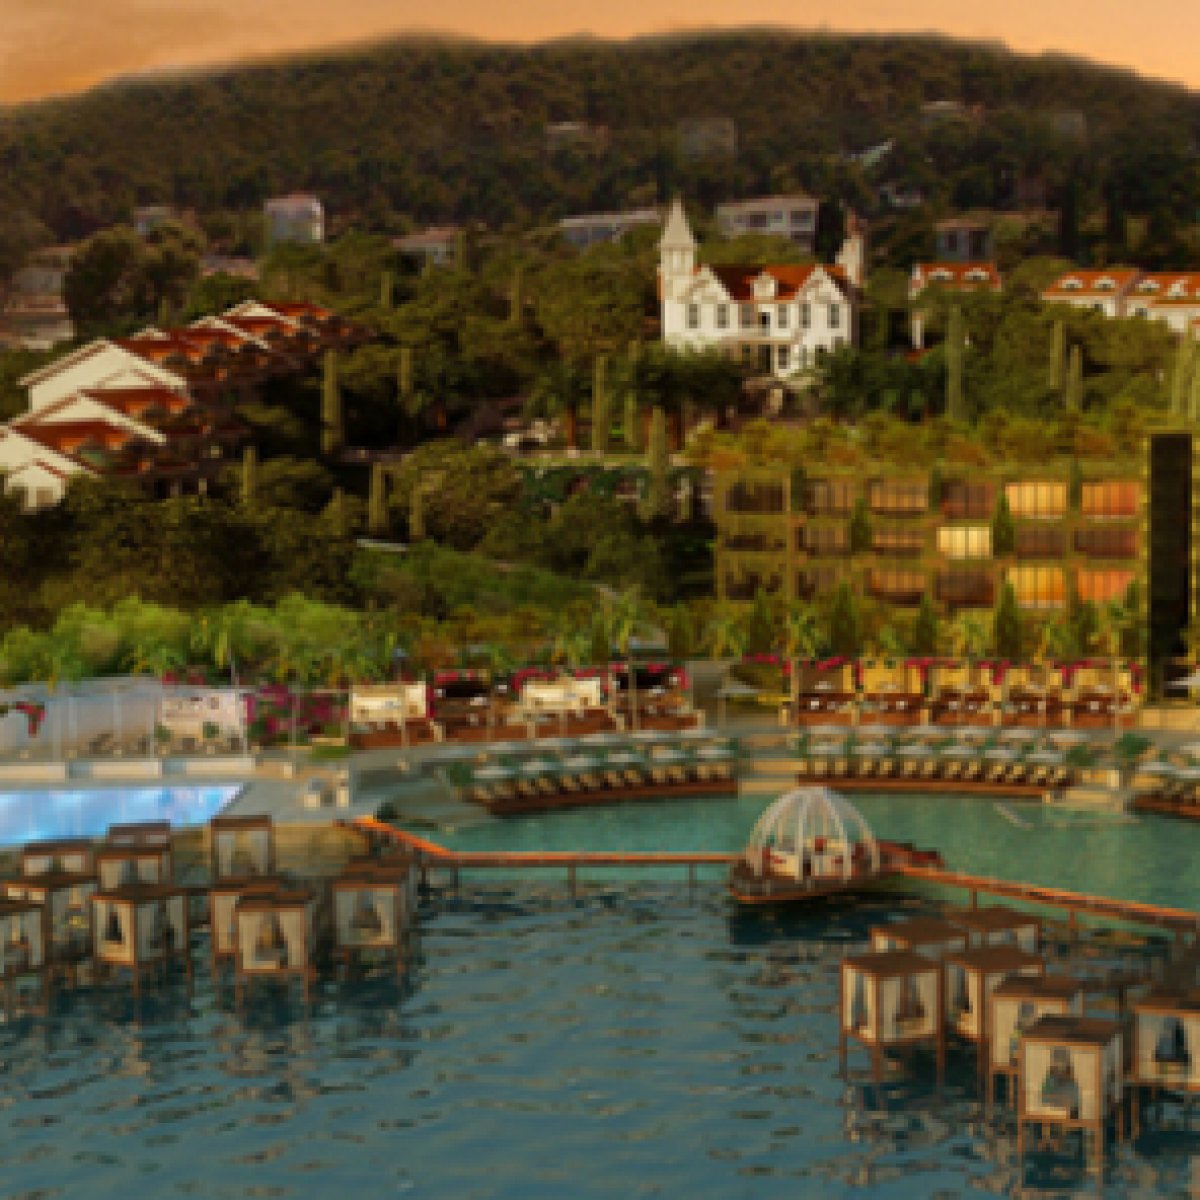 VICEROY PRINCES’ ISLANDS HOTEL, ISTANBUL